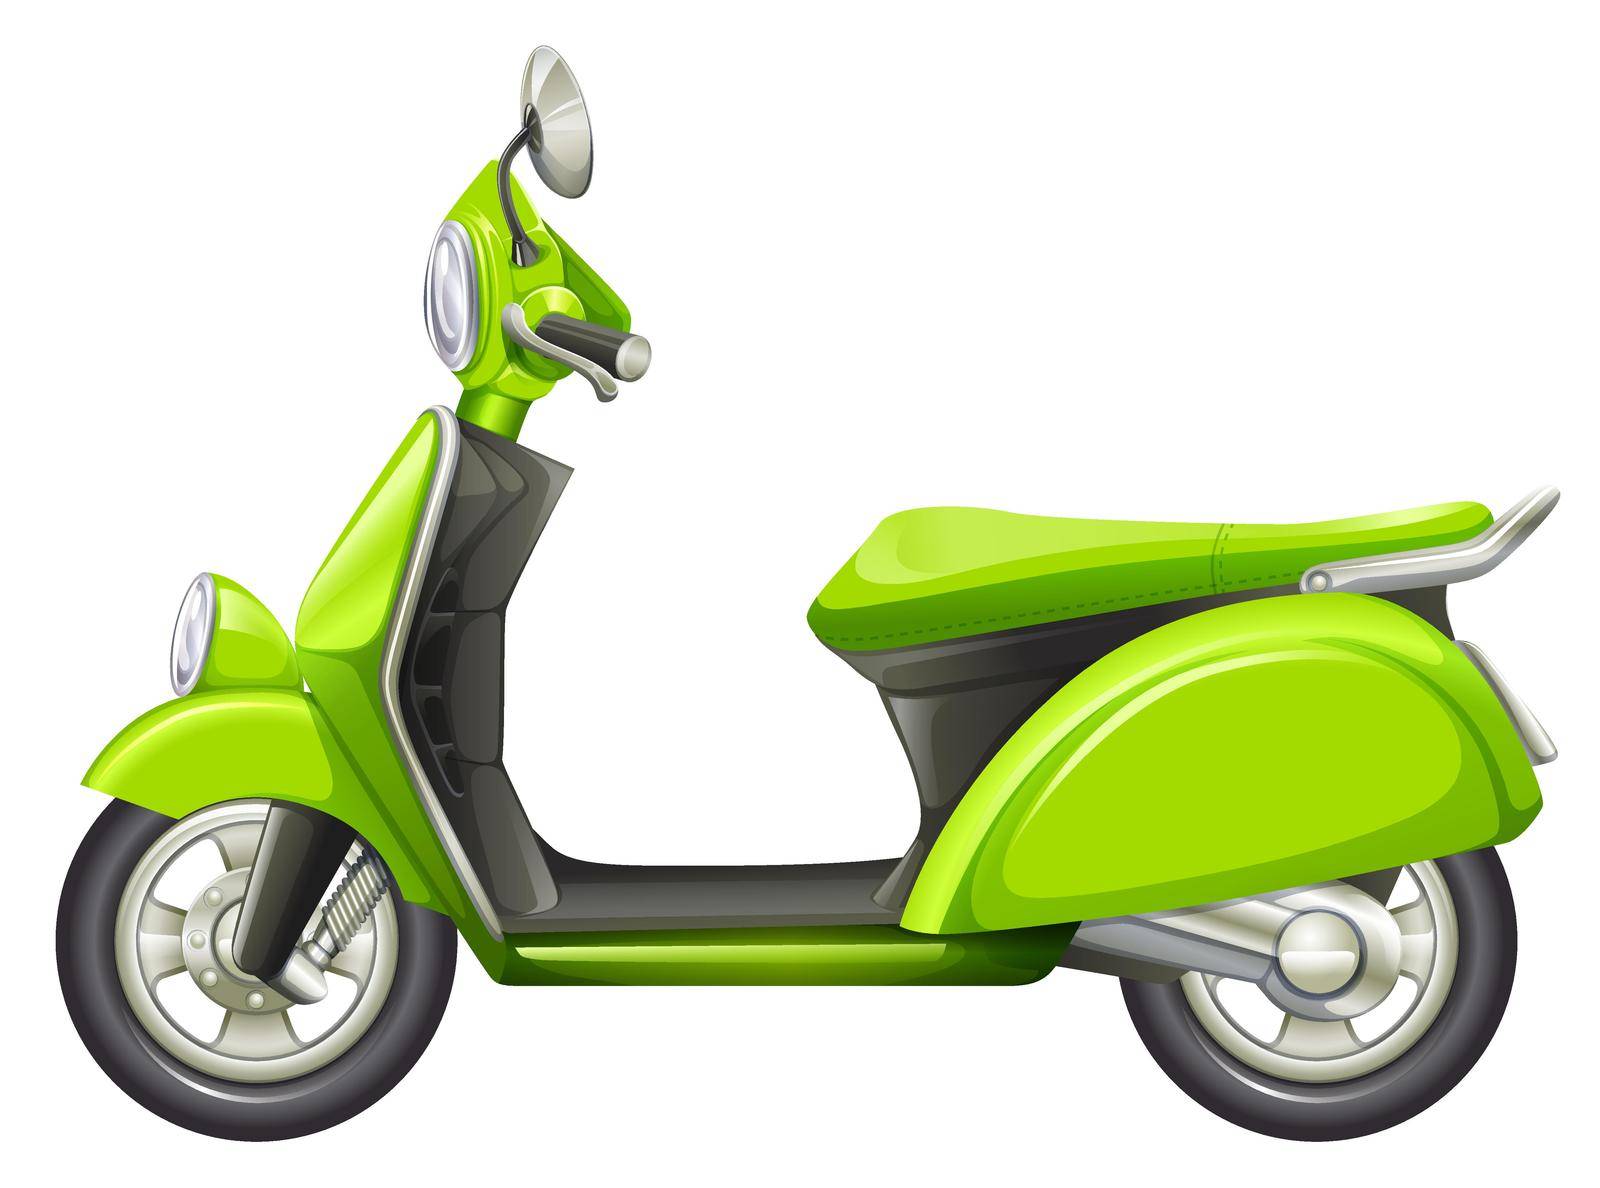 Illustration of a green scooter on a white background